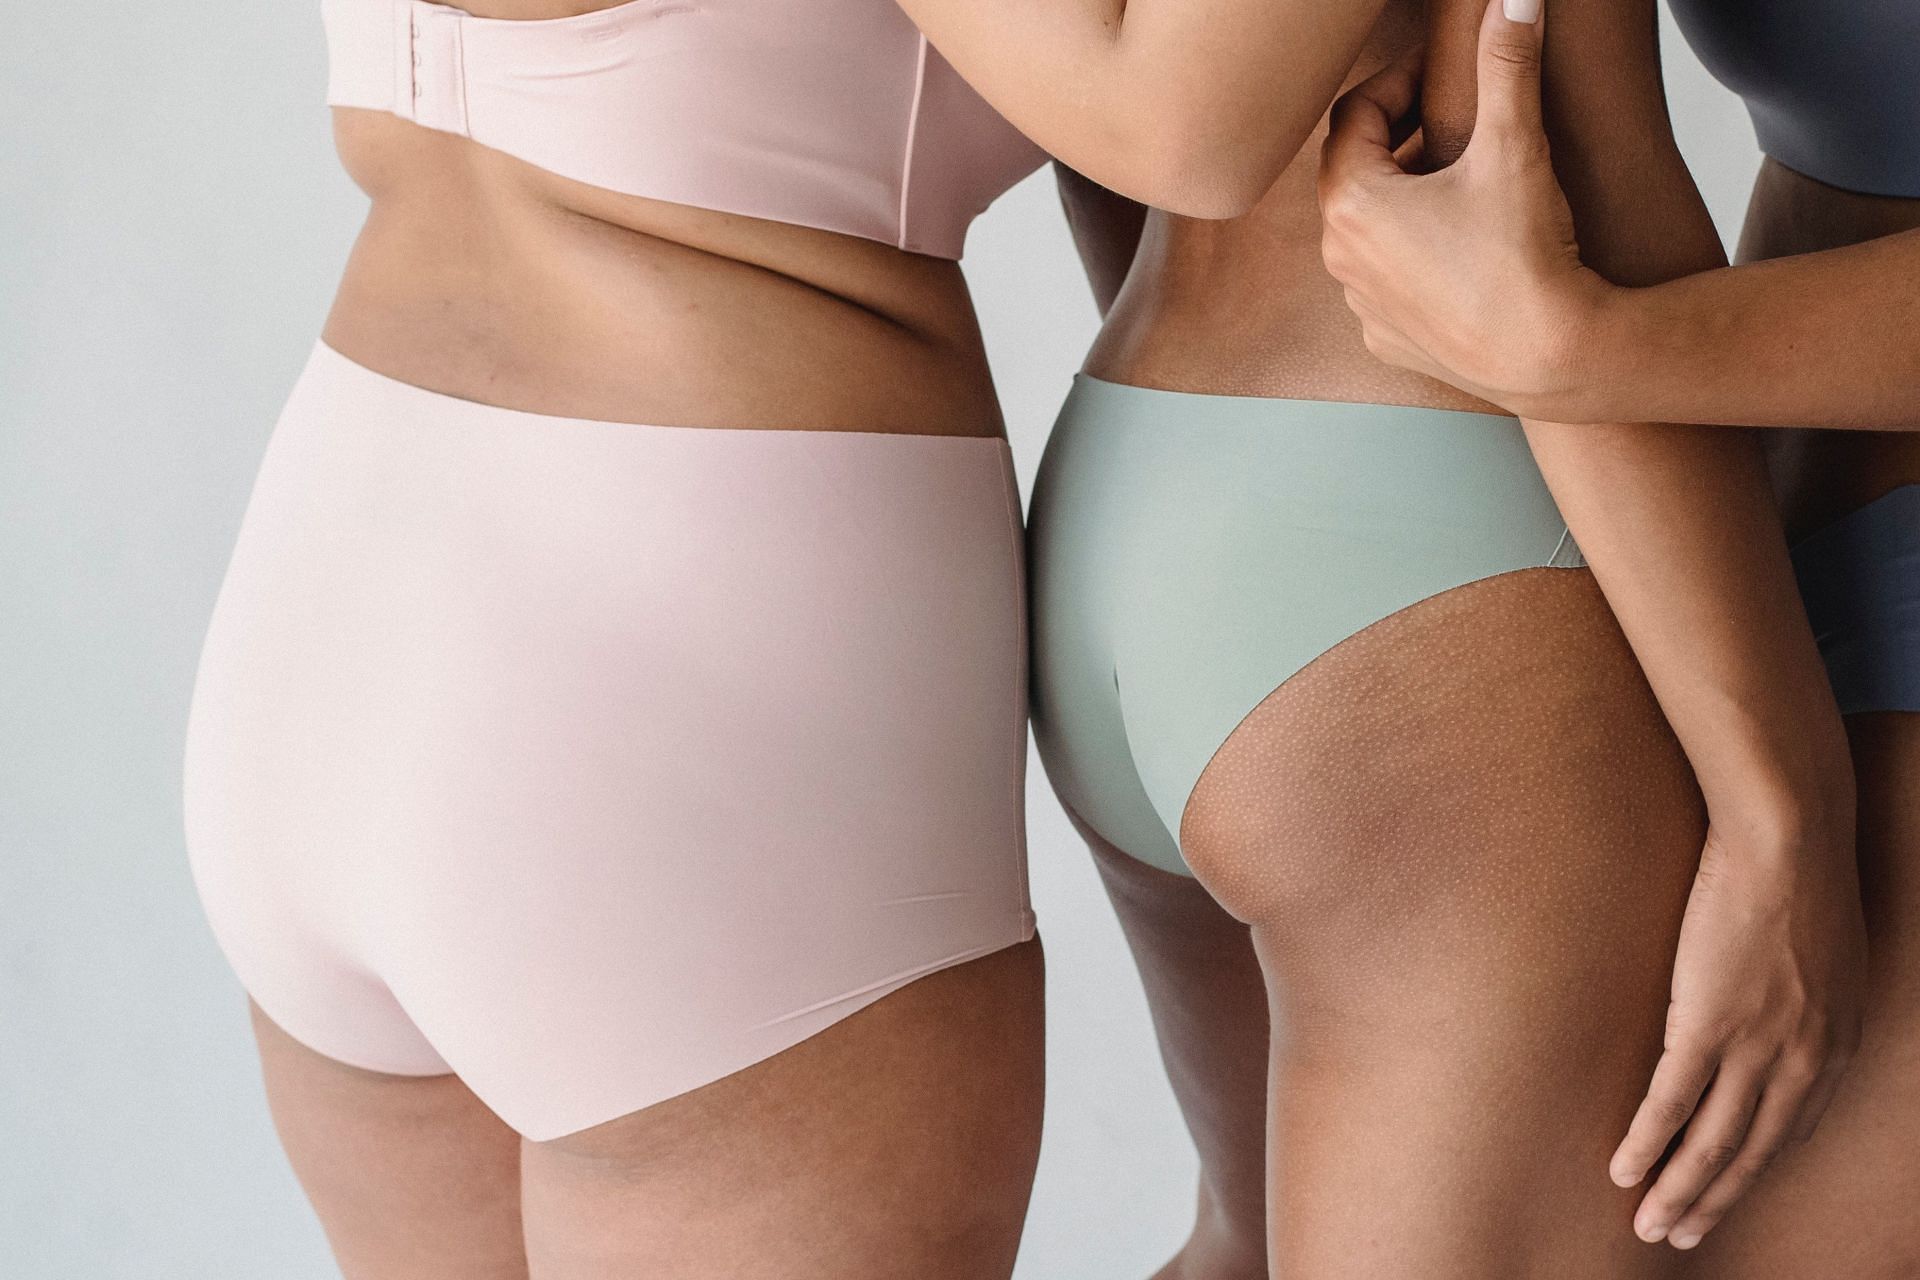 The best treatment for butt acne is to wear loose-fitting clothing and keep the area clean of grime and sweat (Image via Pexels @Antonius Ferret)